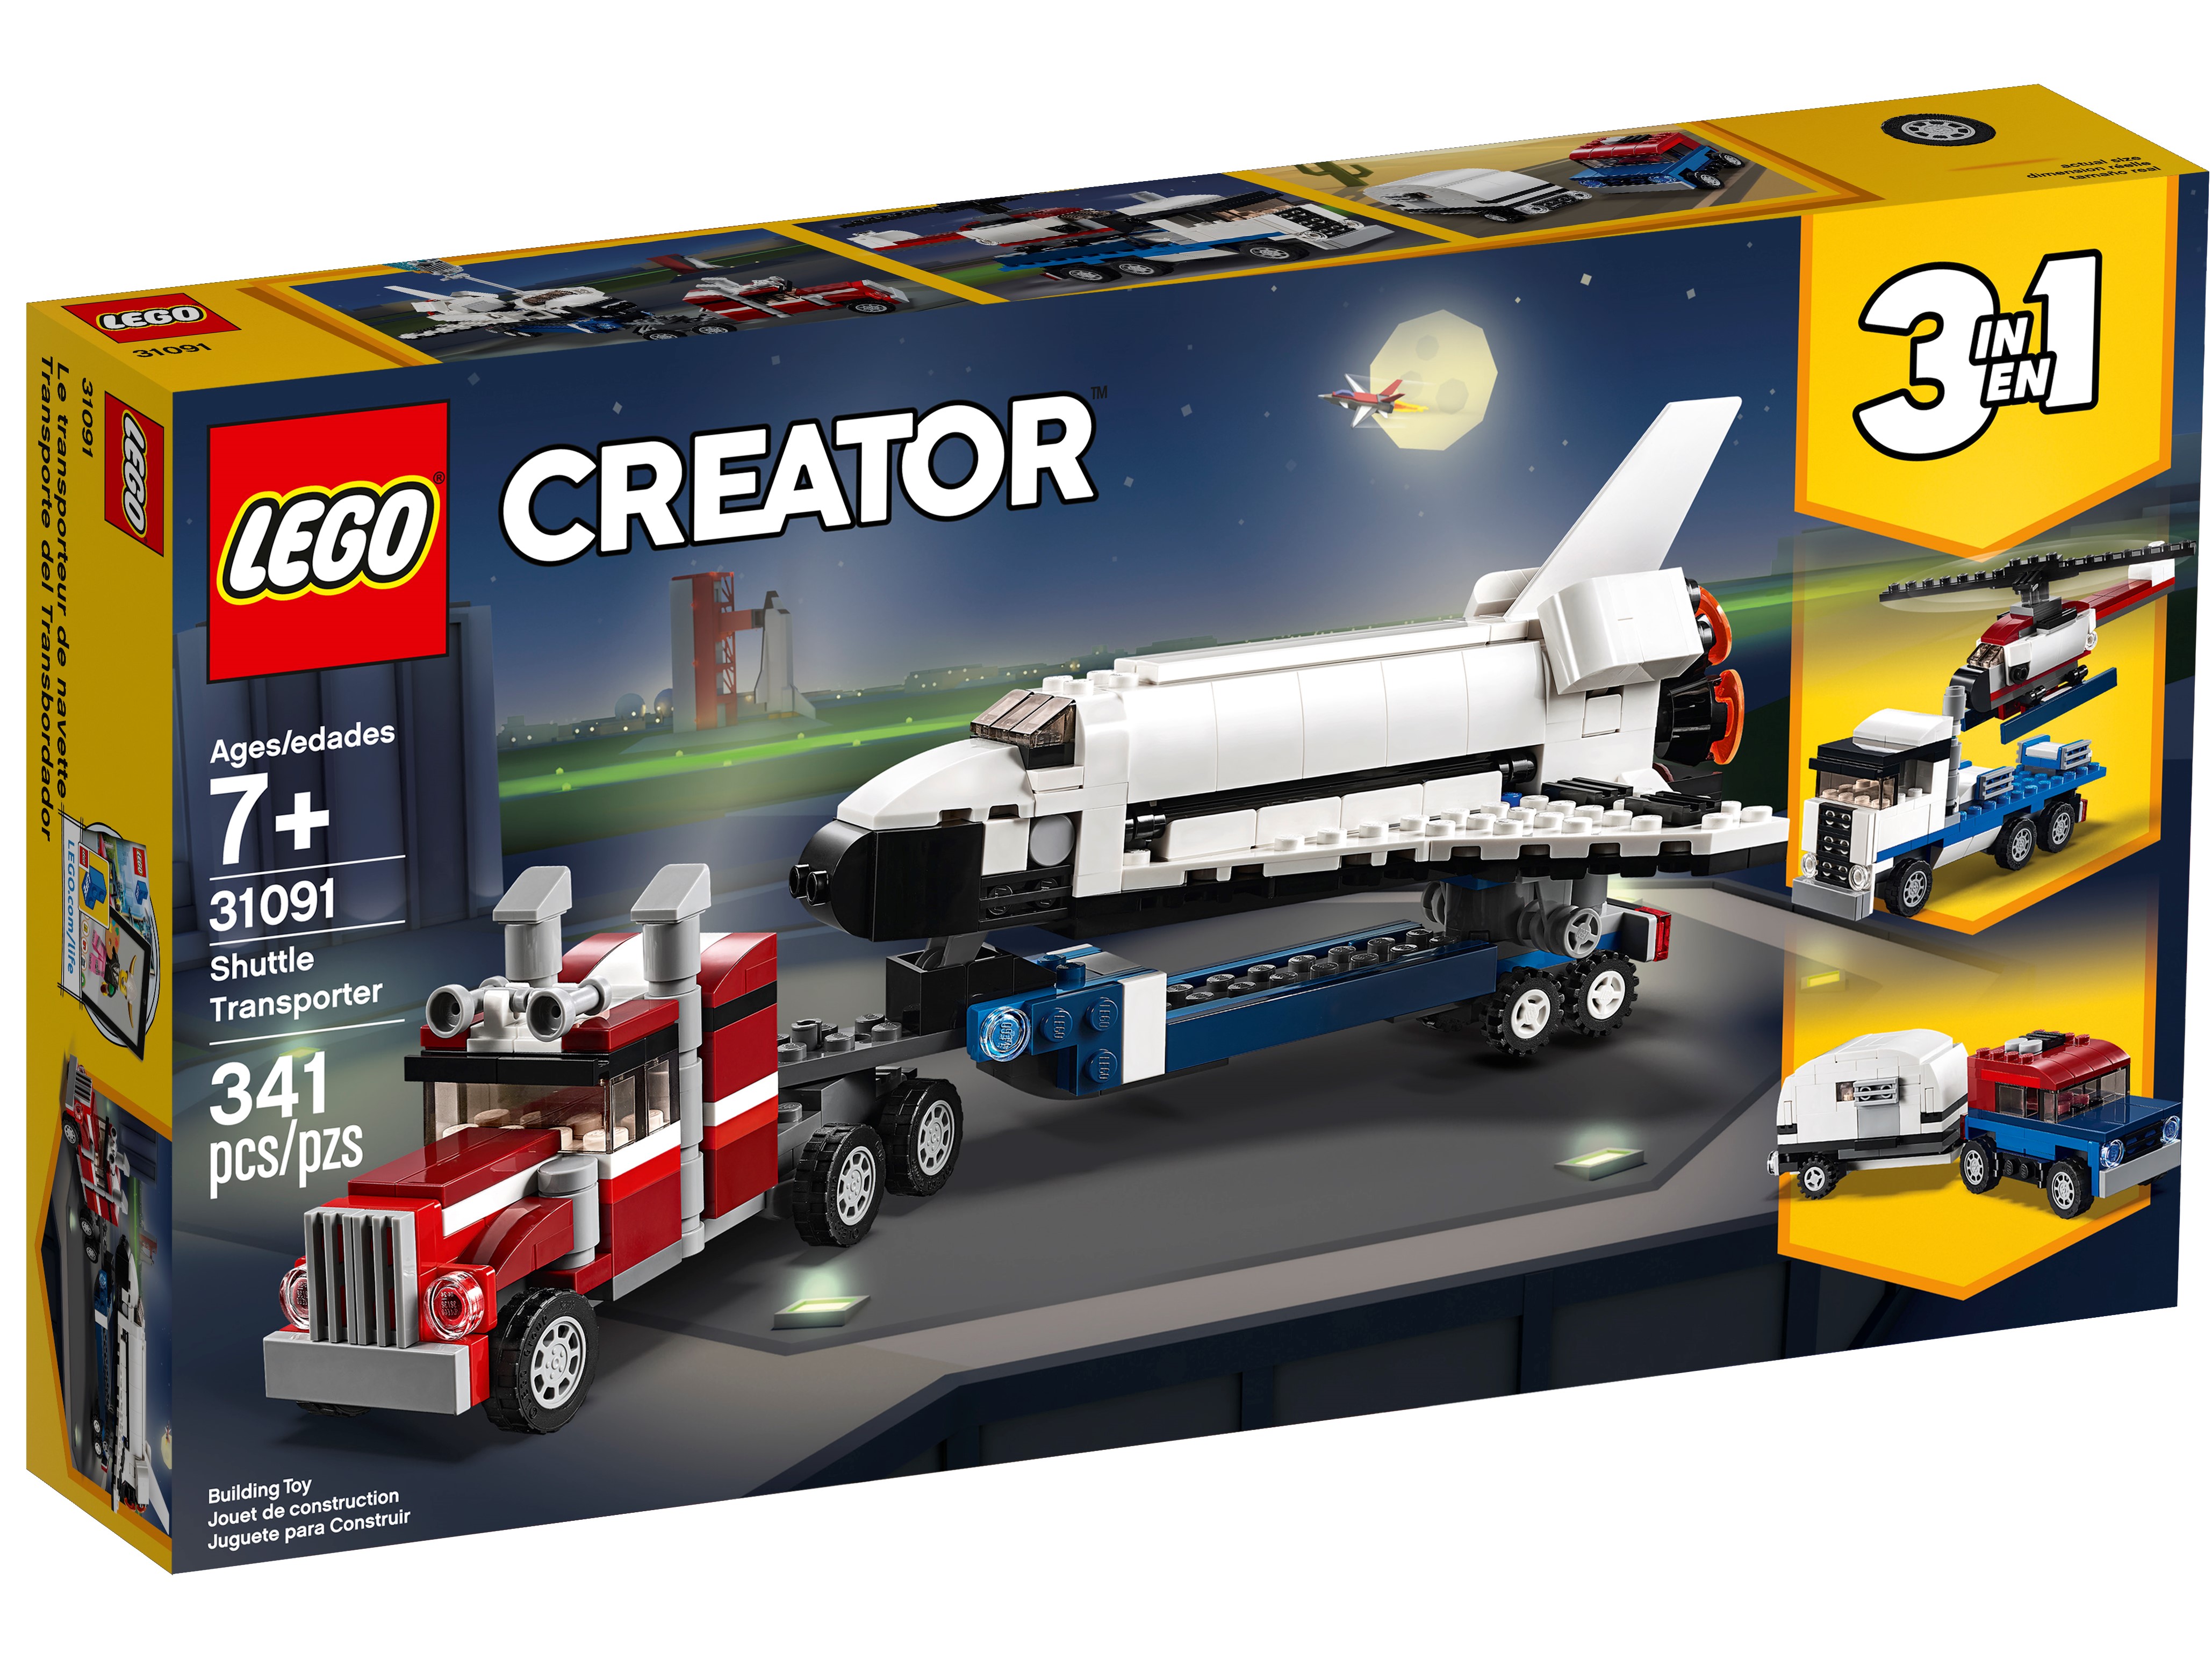 341 Pieces LEGO Creator 3in1 Shuttle Transporter 31091 Building Kit